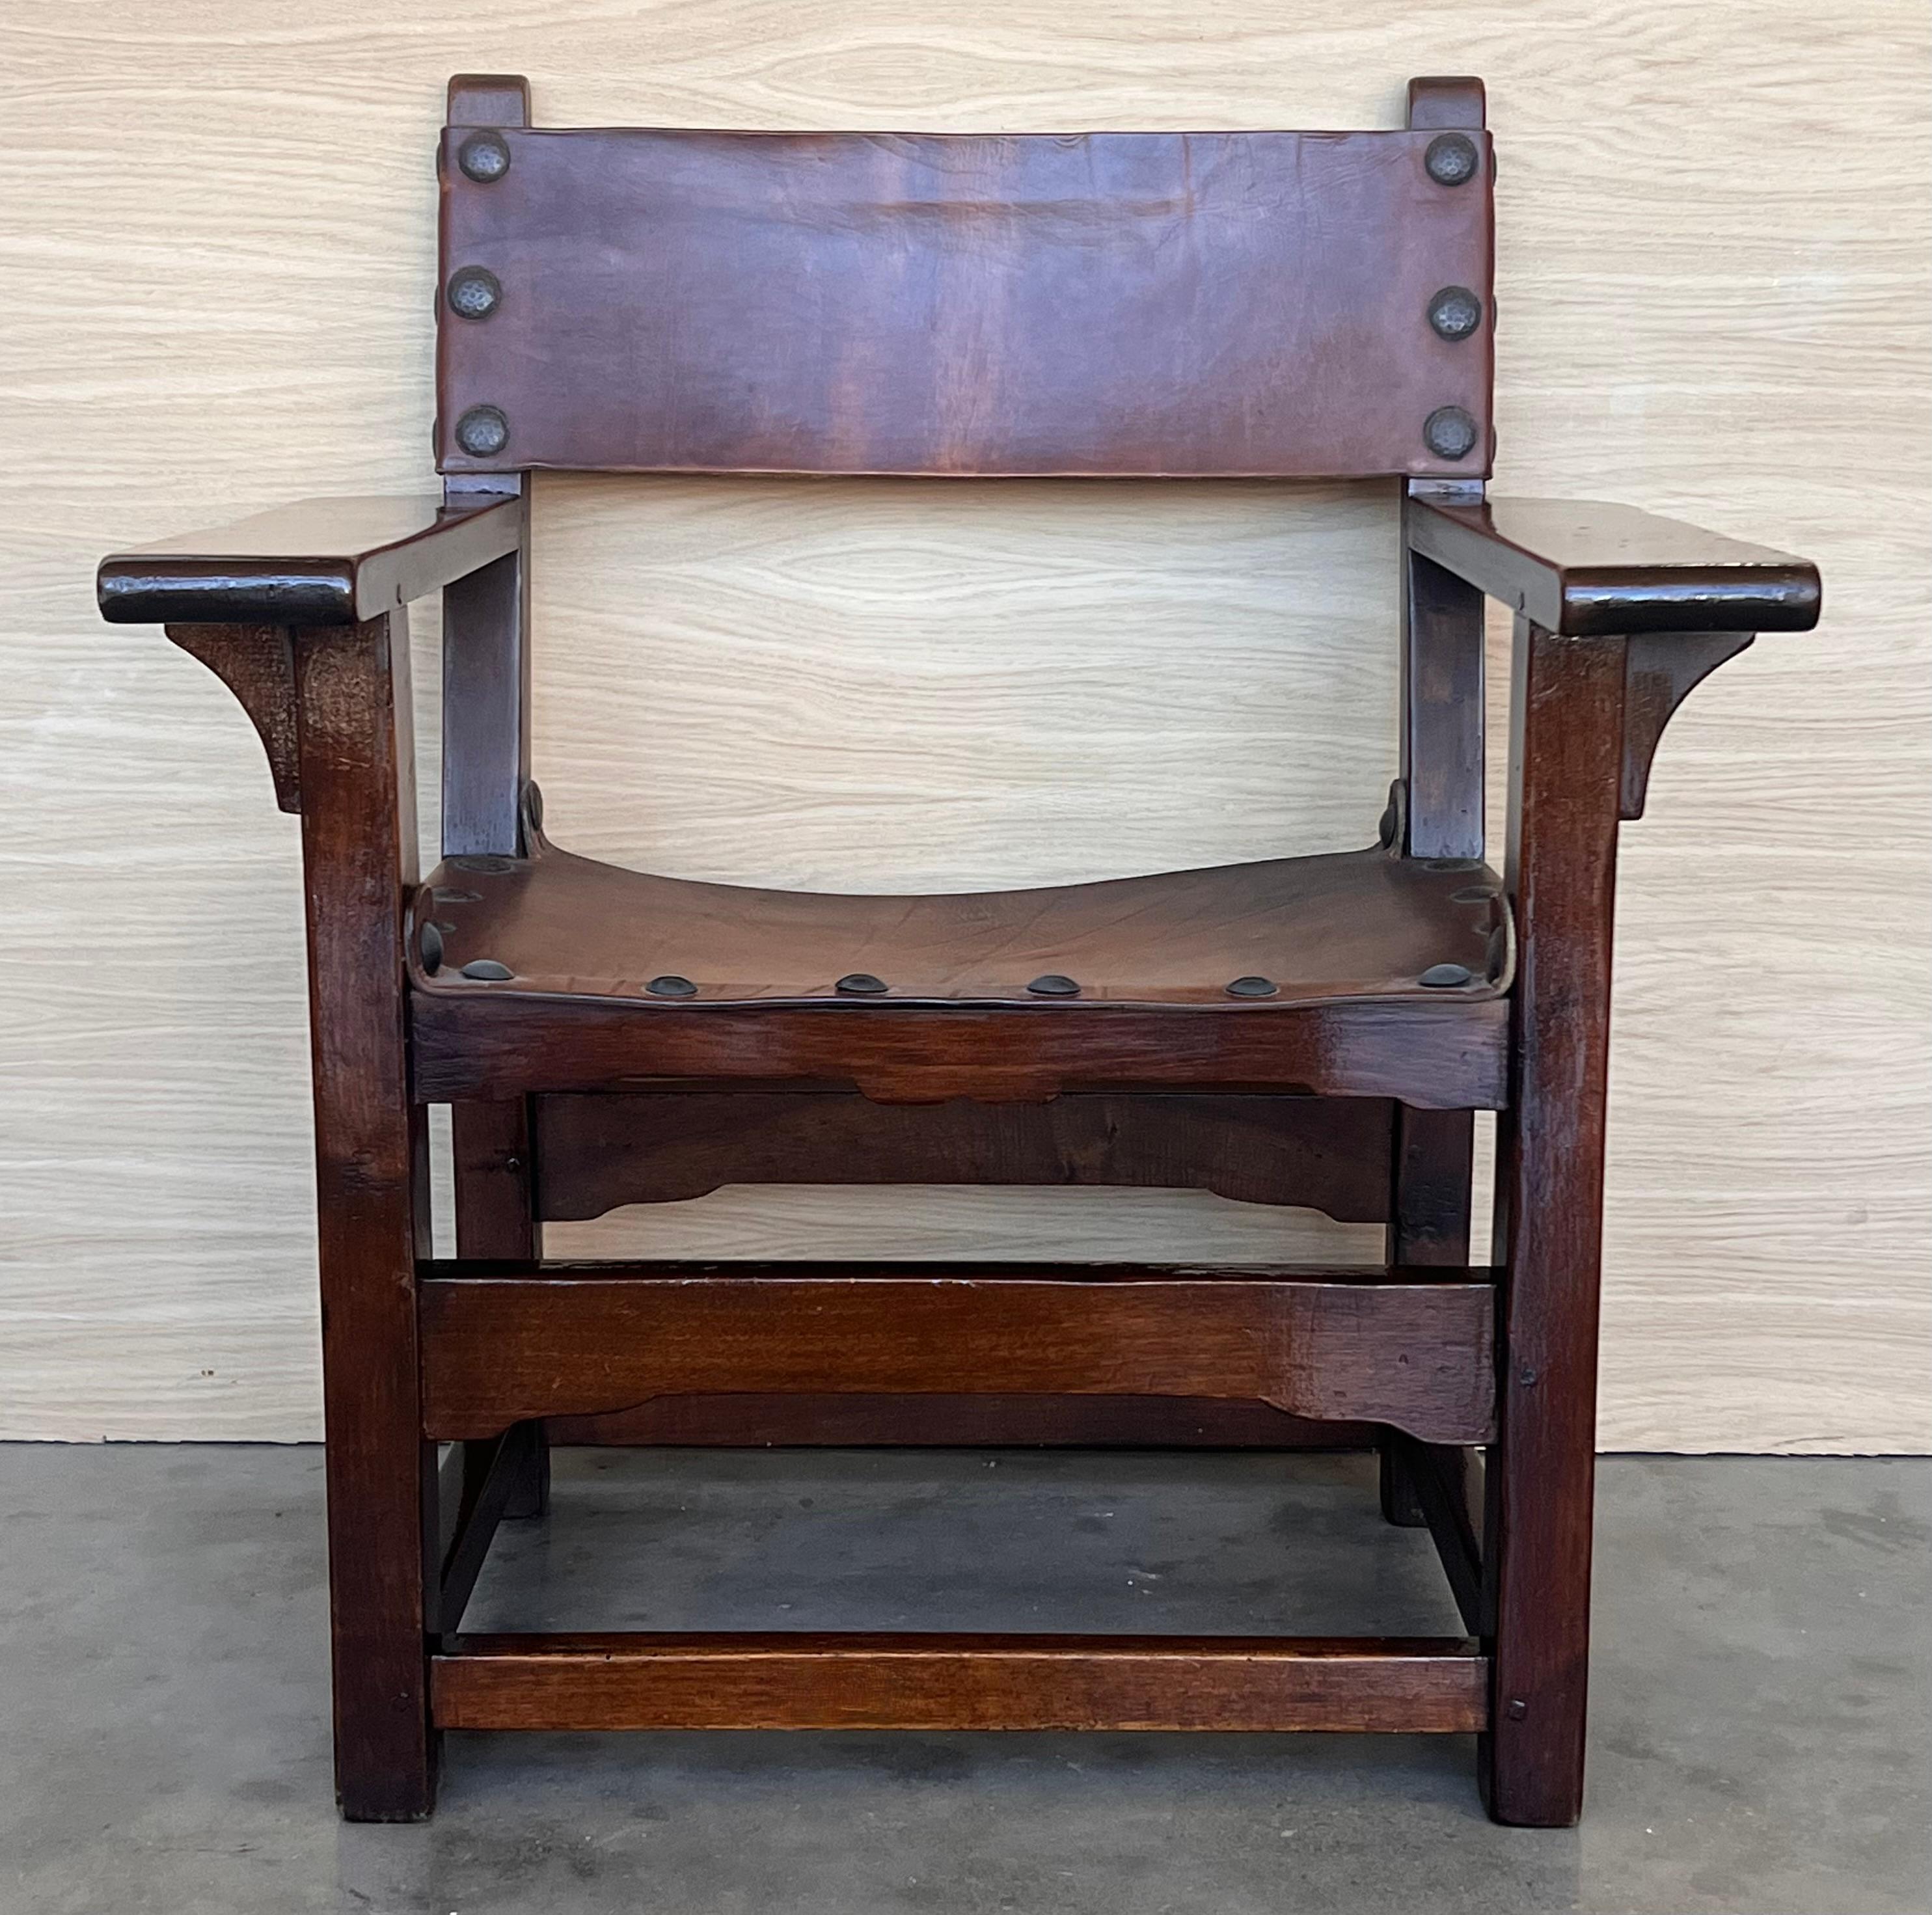 19th century walnut Spanish colonial altar armchairs with leather back and seat The unusual size of the arms complete this exceptional pair of armchairs
Measures: Height to arms 23.81 in.